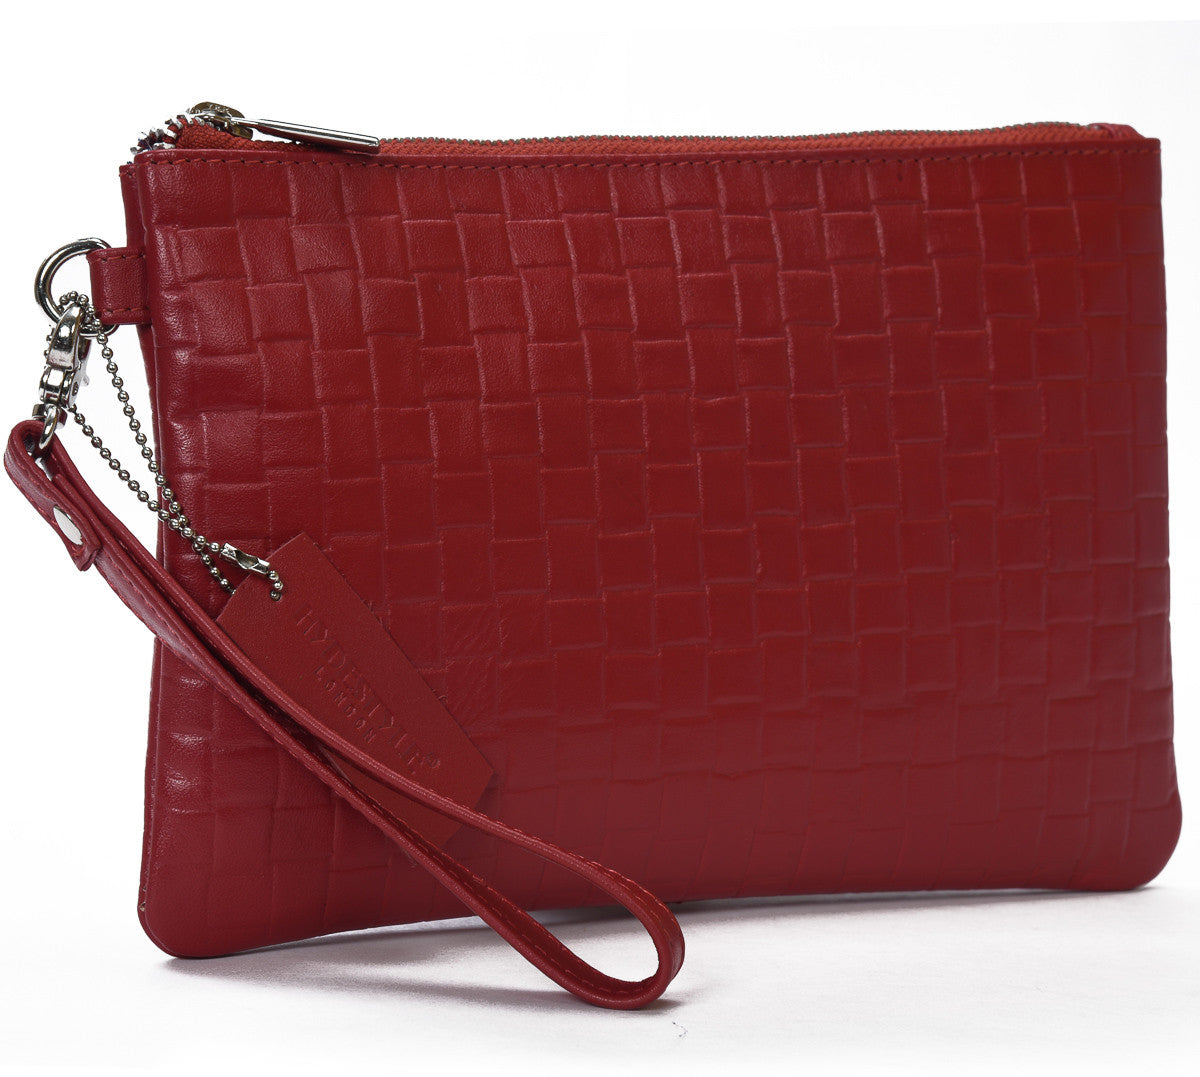 Secure RFID embossed leather ladies wristlet clutch with card case #LB66 Red